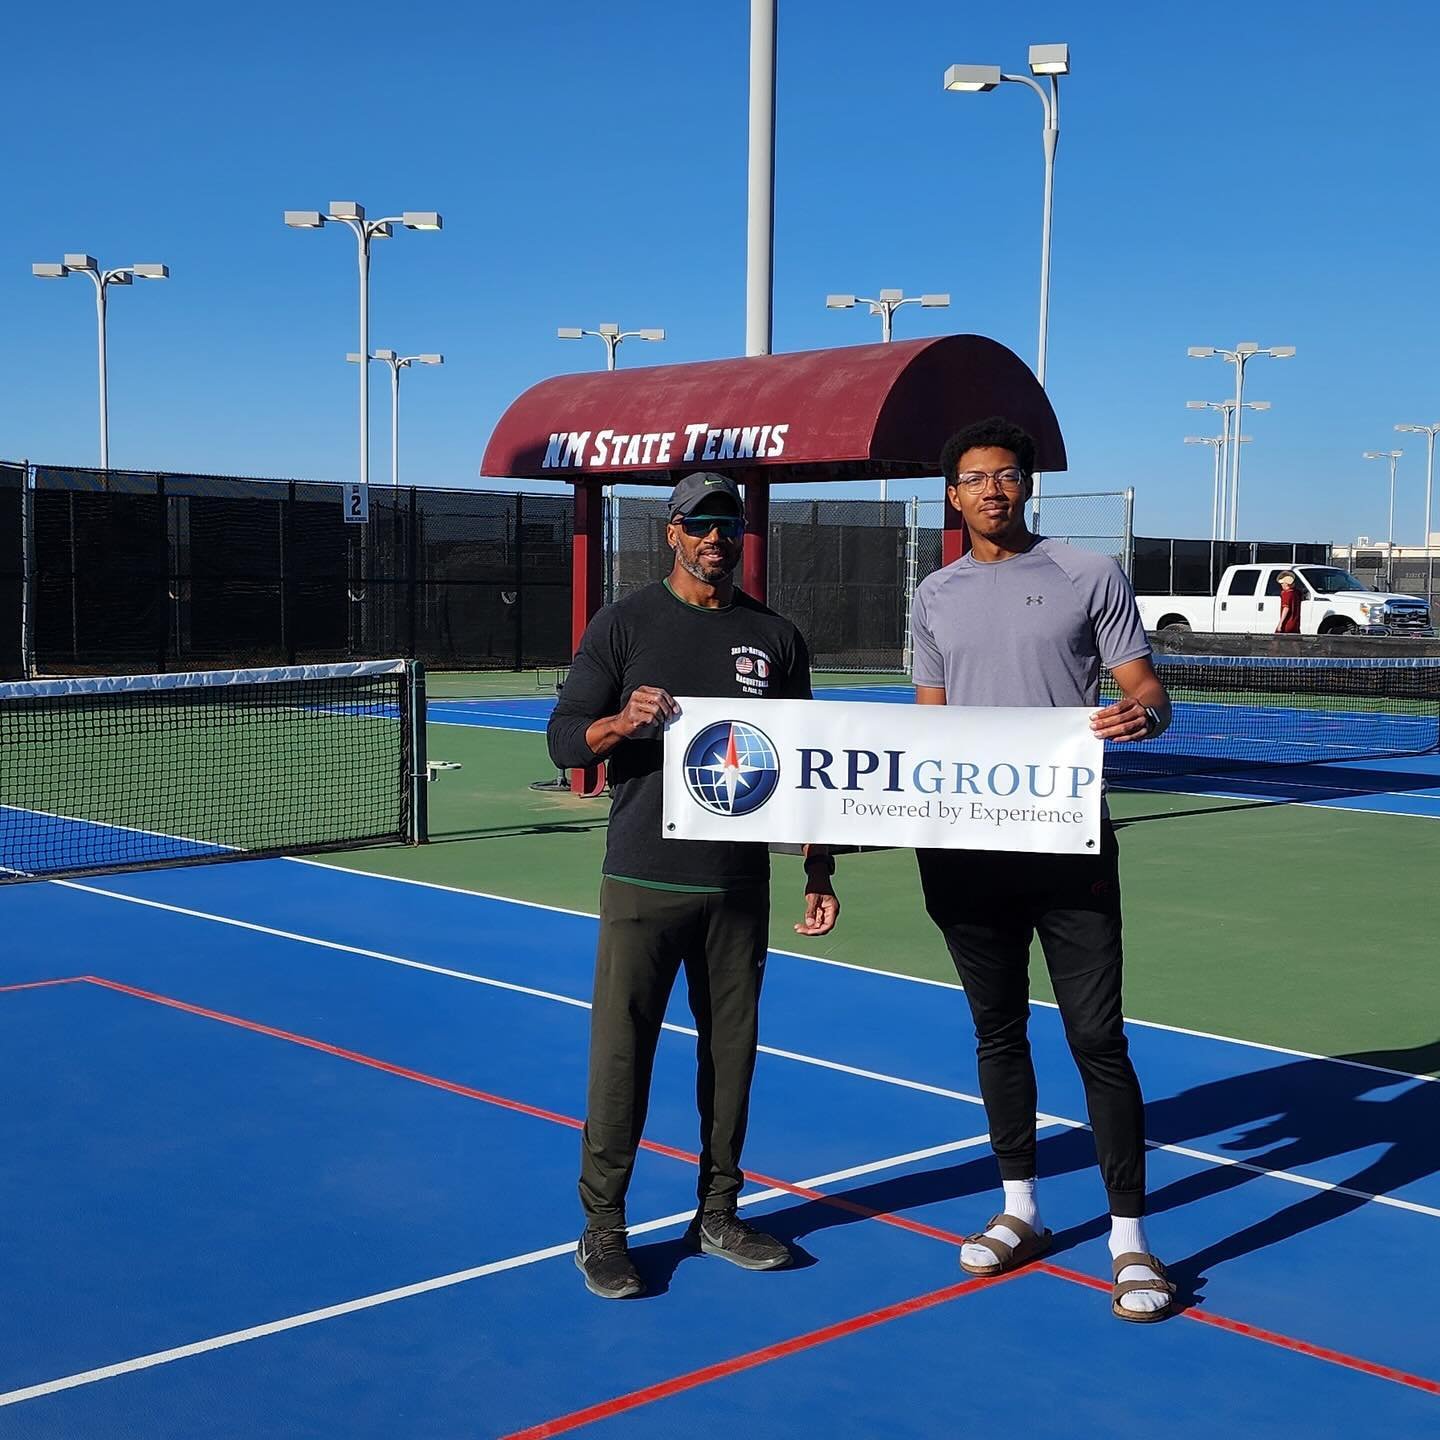 Our west team participated in the Aaron Gifford Pickleball Benefit Tournament to support our country&rsquo;s veterans who returned from war with PTSD. RPI Group was a platinum sponsor of the event and had a few teammates play in a few pickleball matc